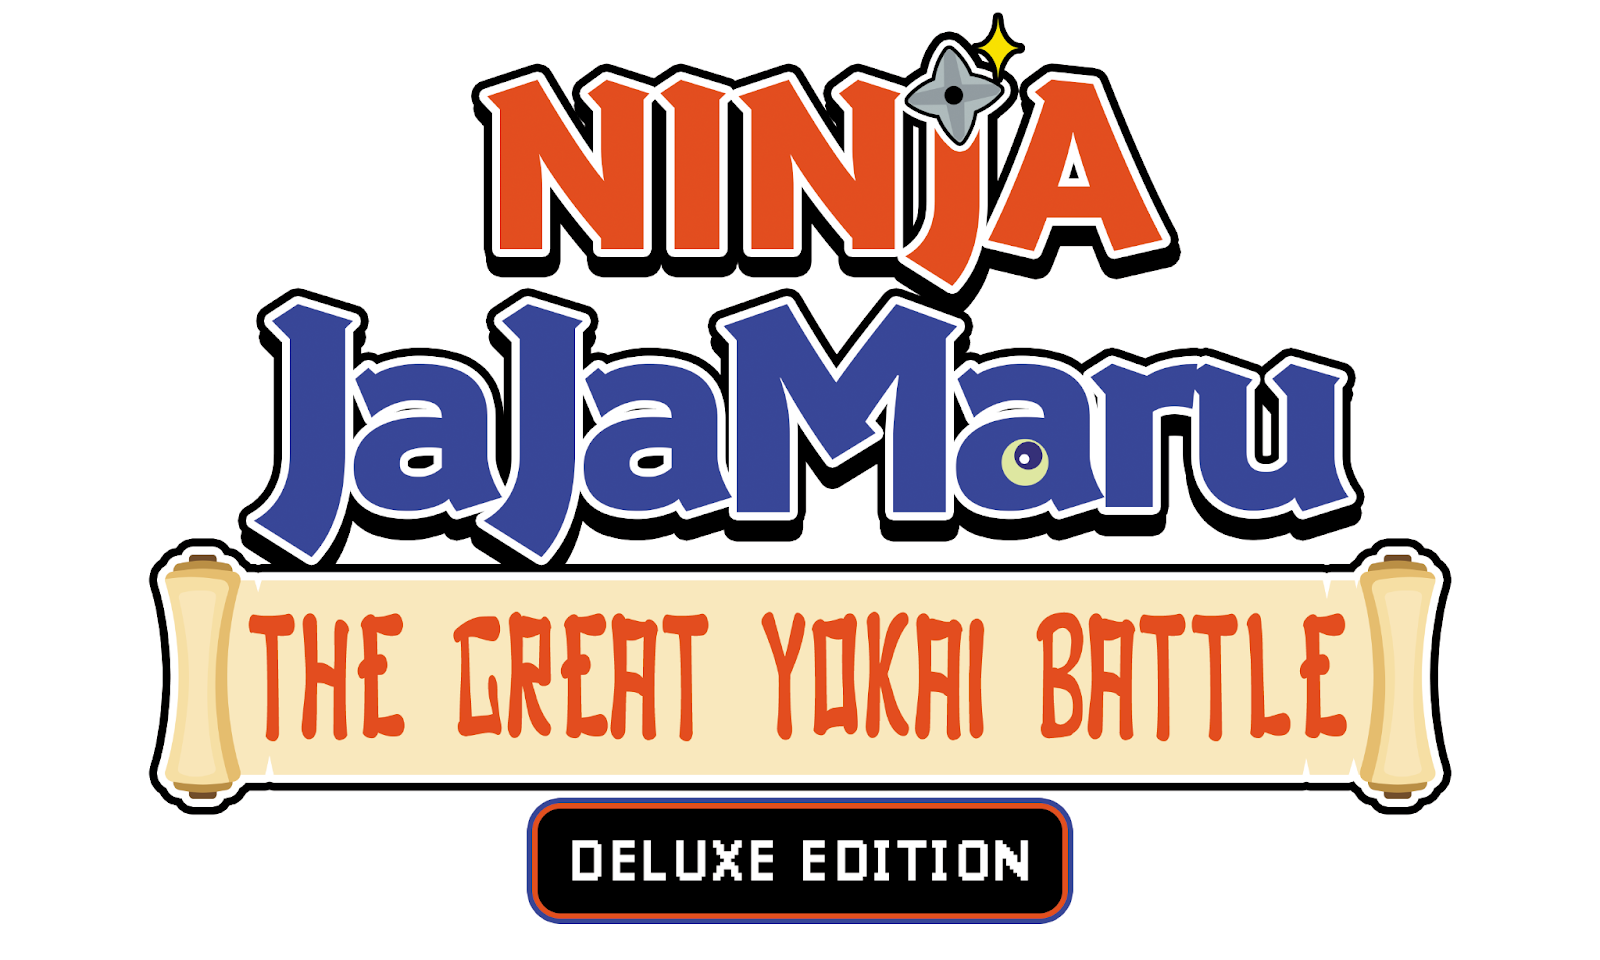 Official logo of the Great Yokai Battle Deluxe Edition